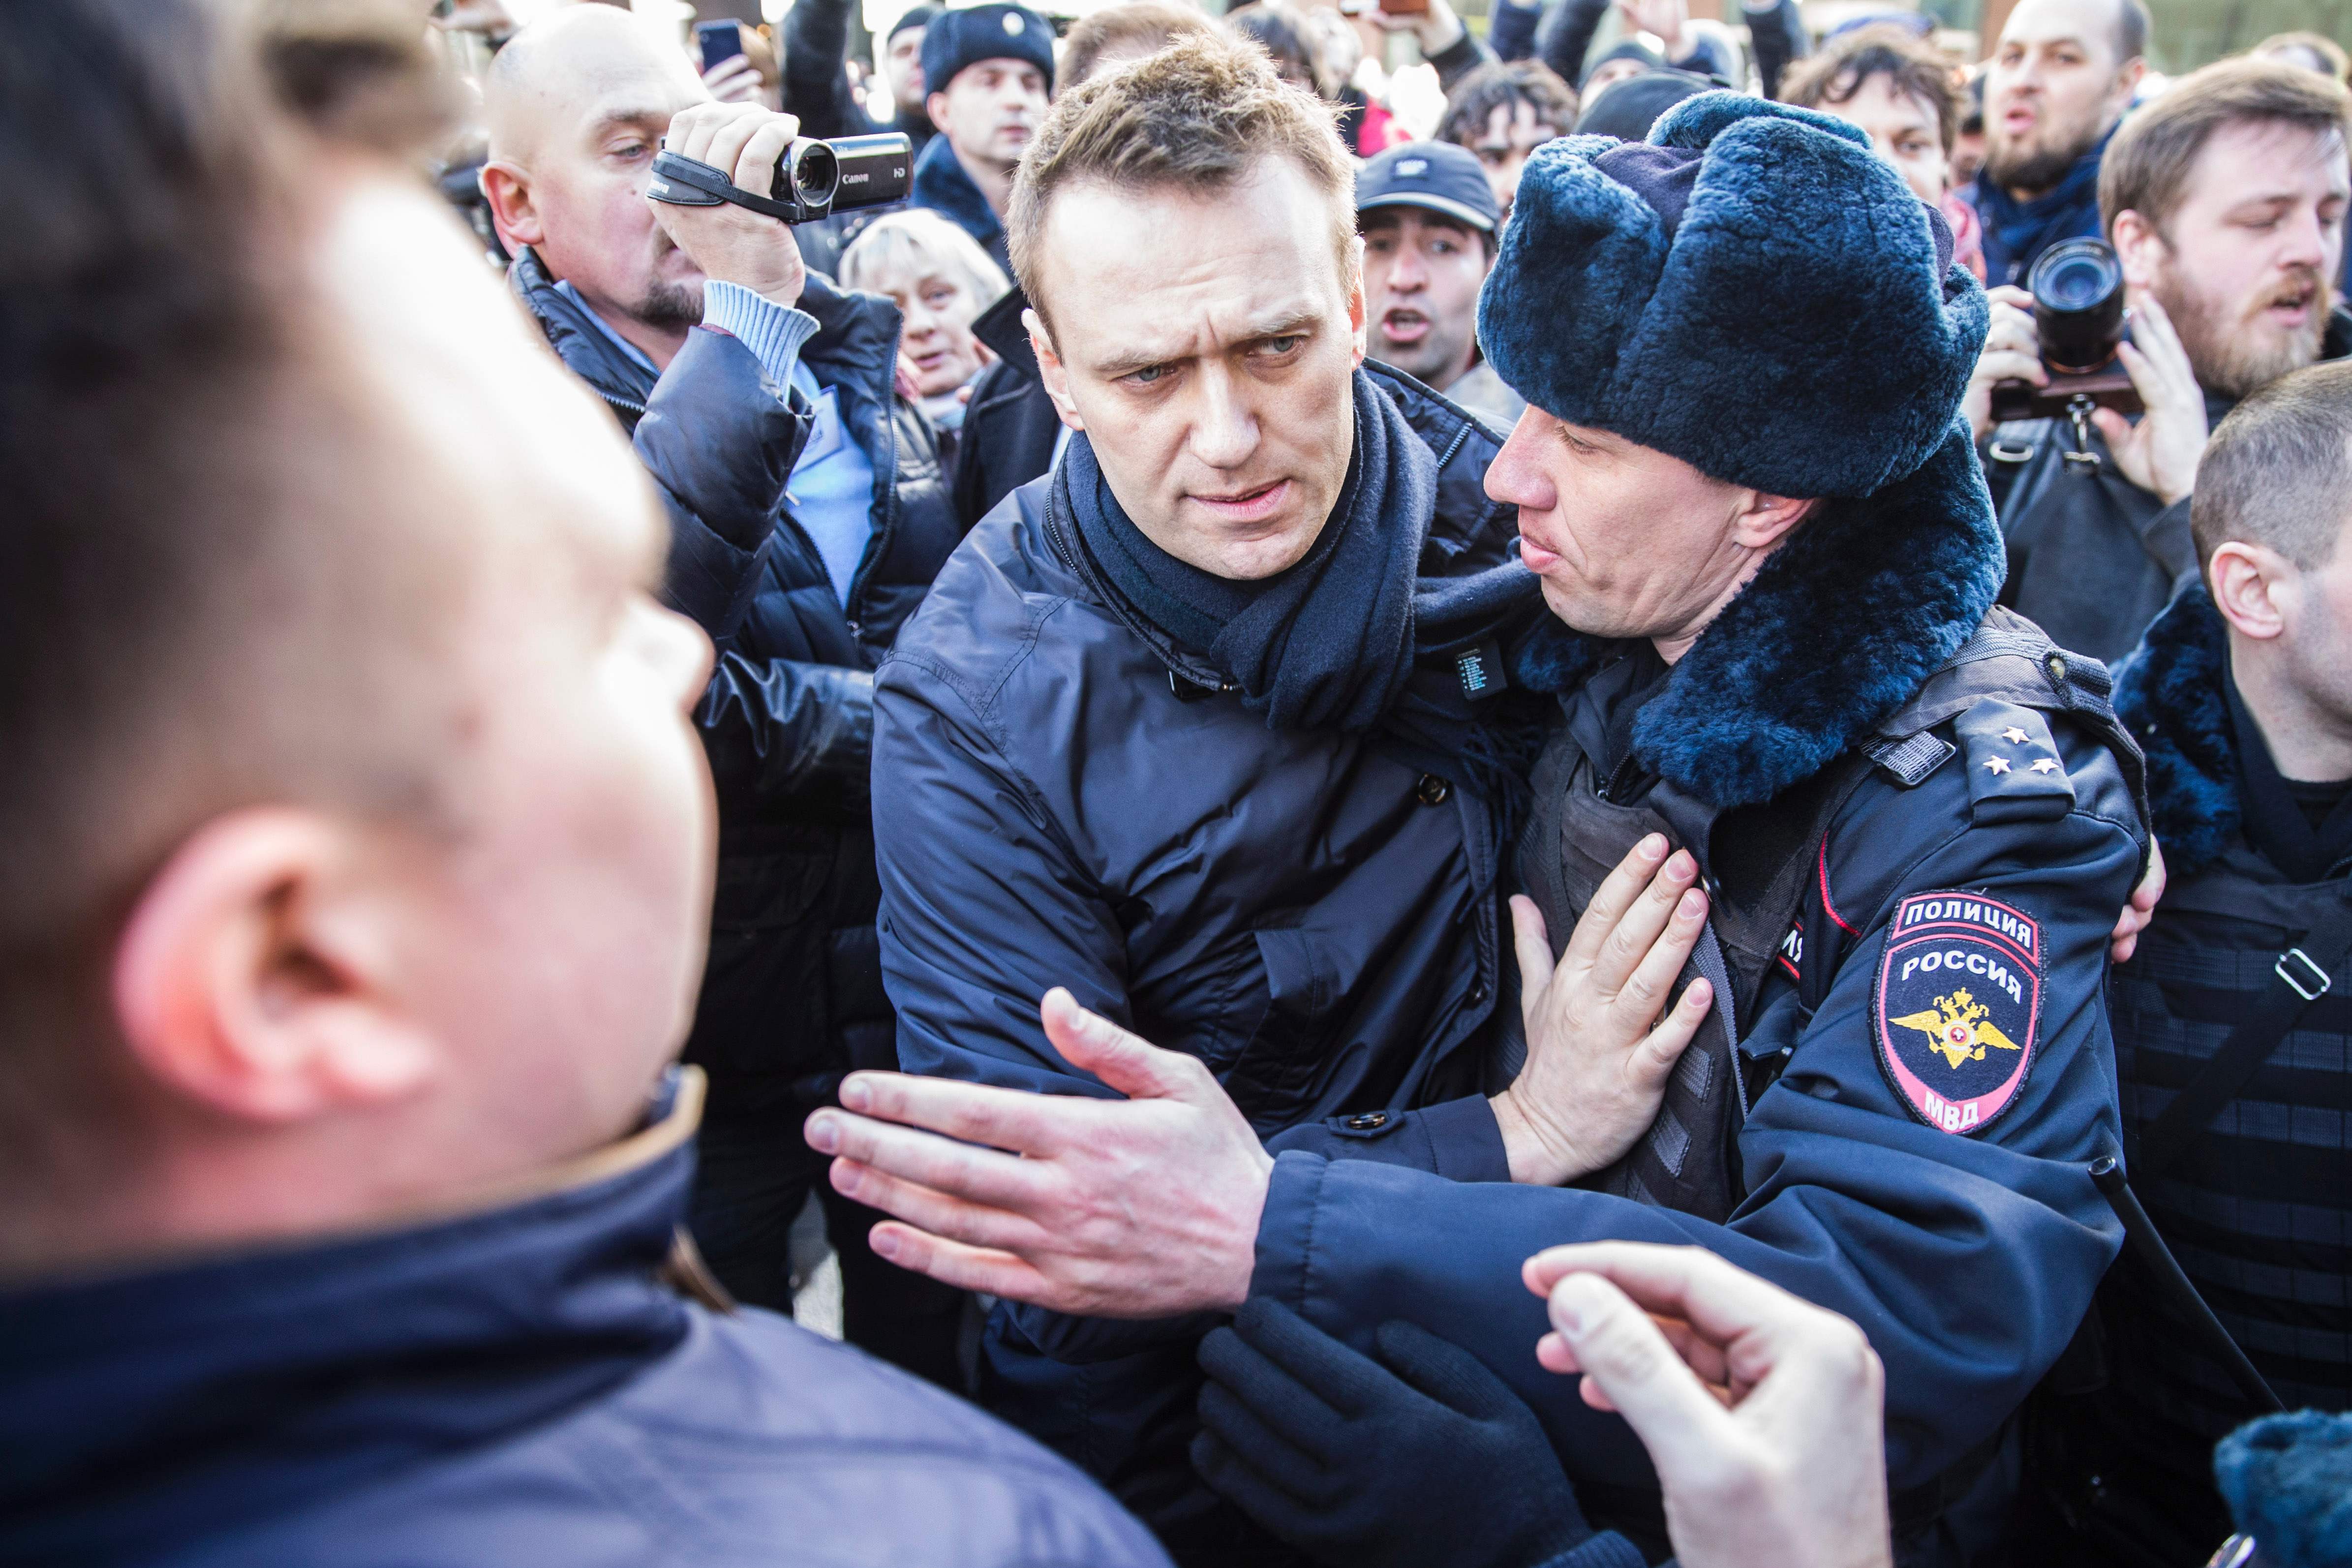 Navalny was poisoned by the Soviet-era nerve agent Novichok in August 2020, which he claimed was a Kremlin assassination attempt